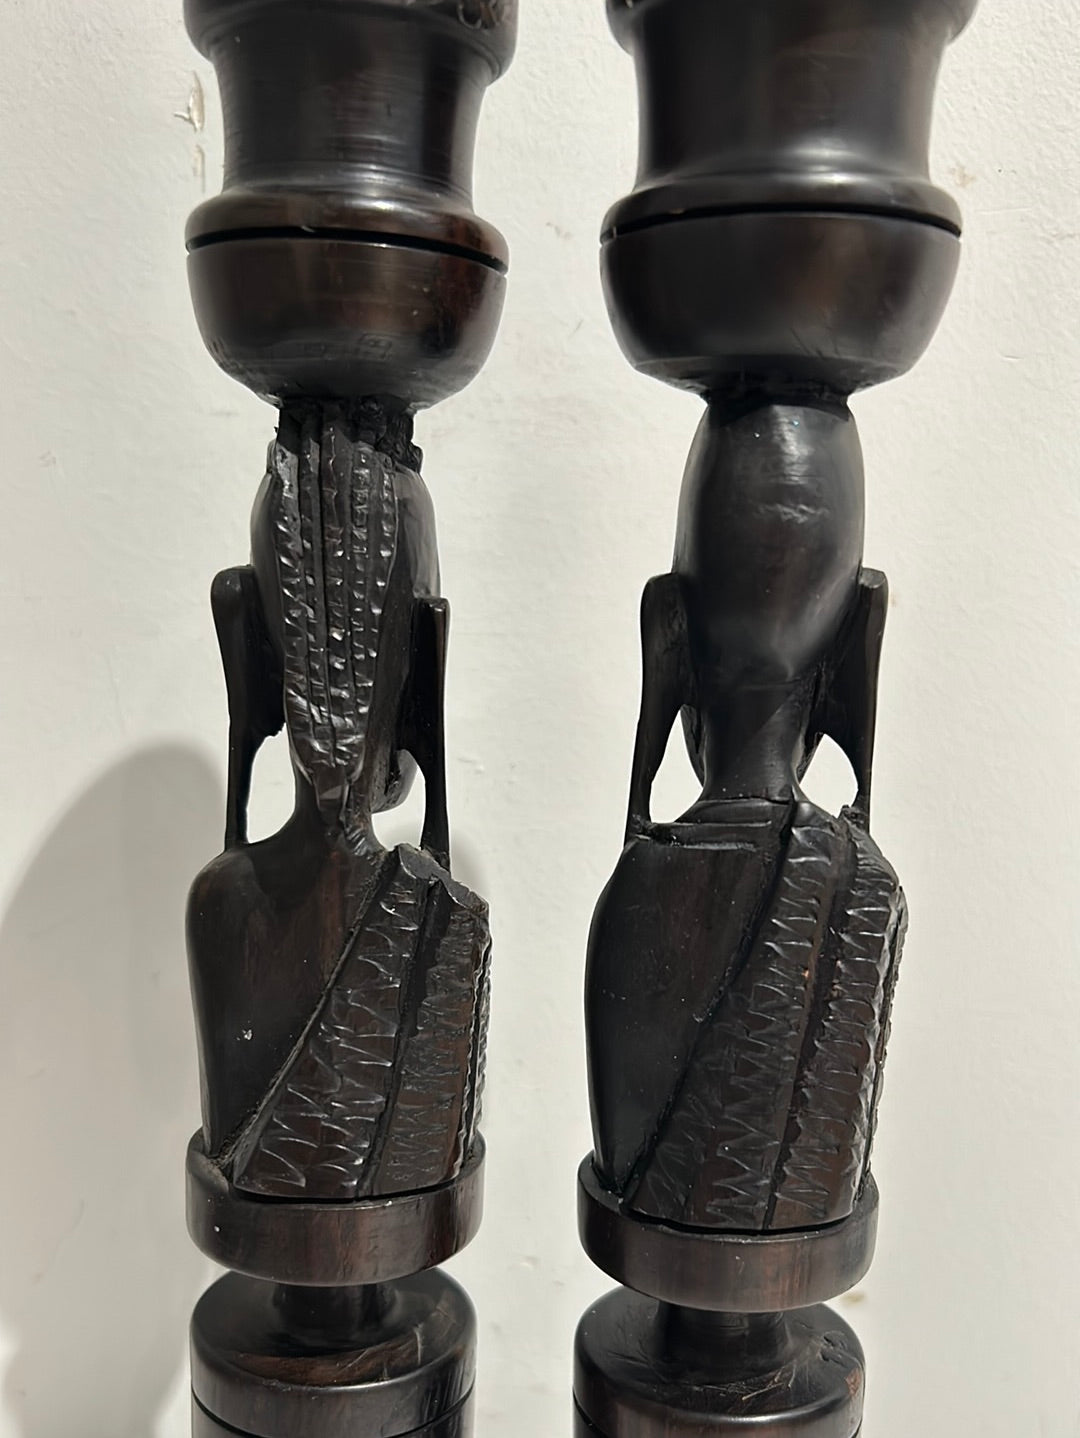 Set of 2 vintage African tribal candle holders